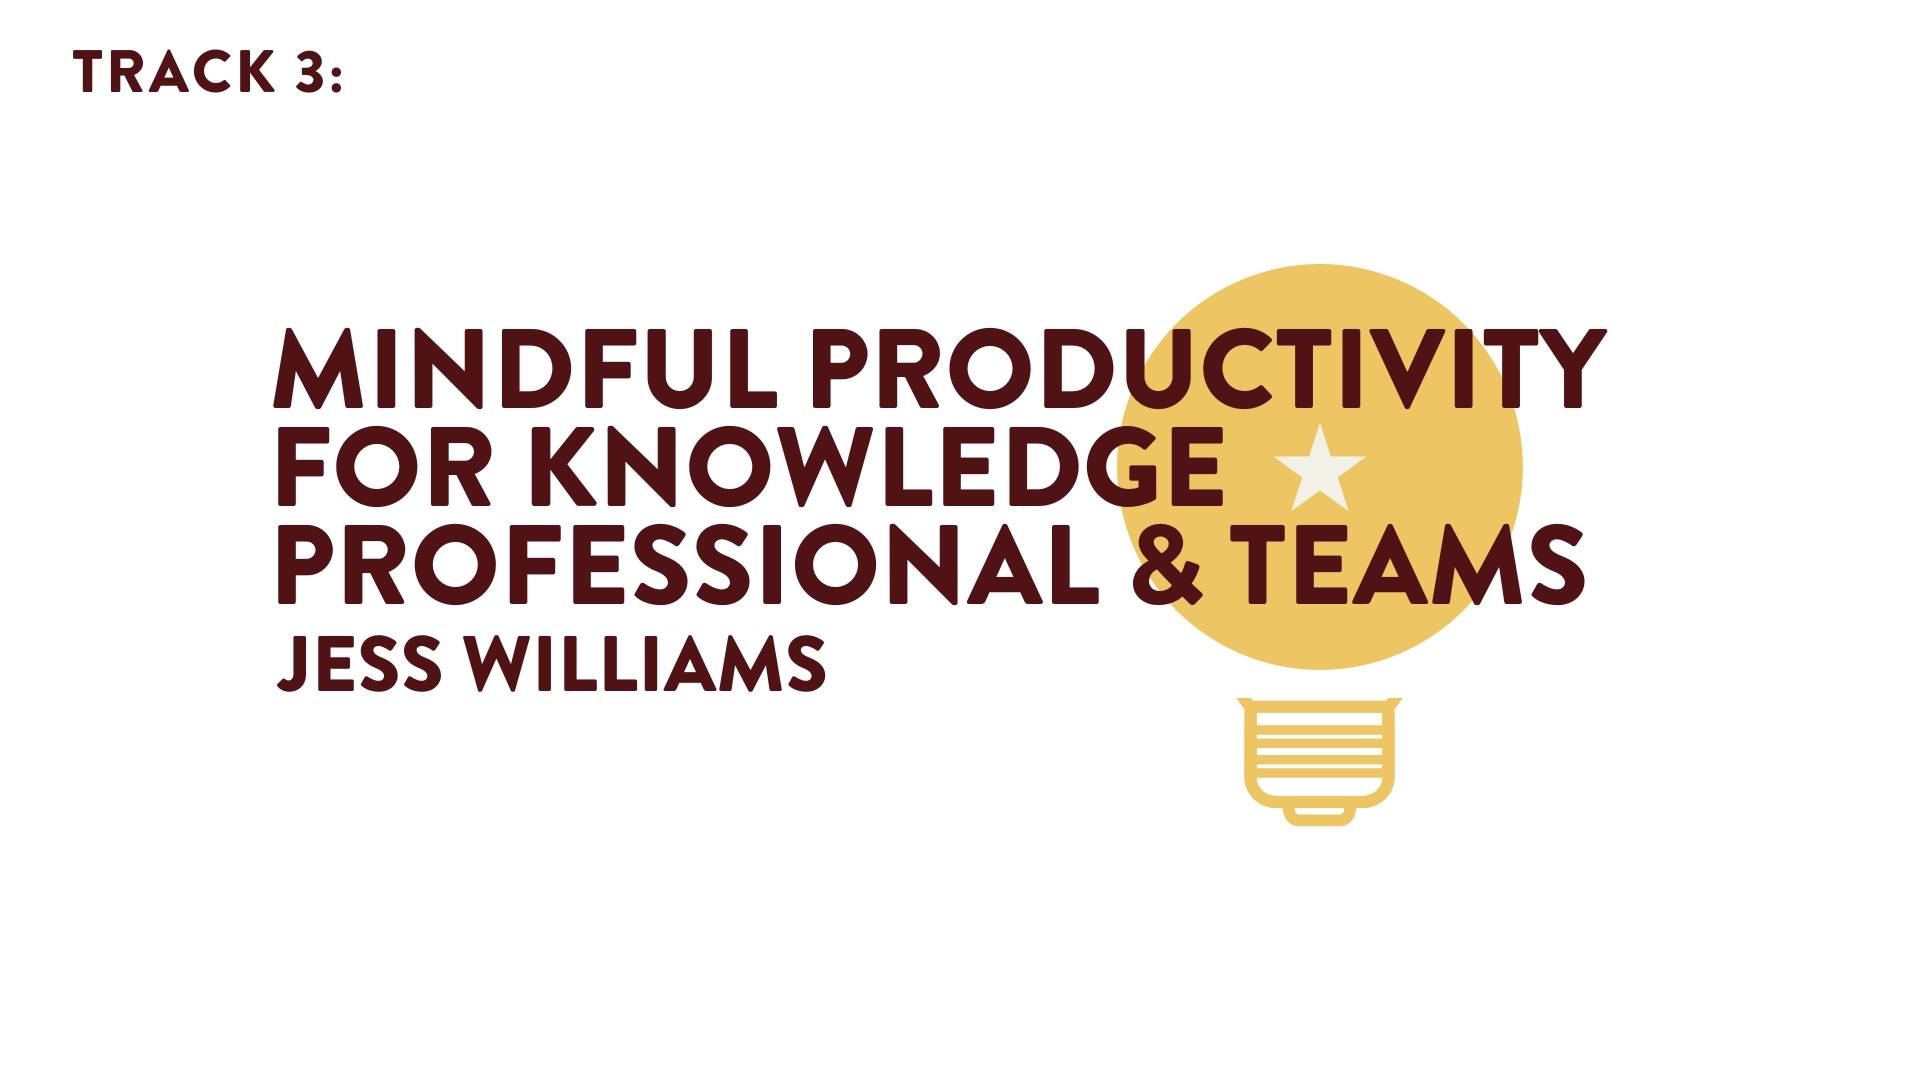 Mindful Productivity for Knowledge Professionals & Teams